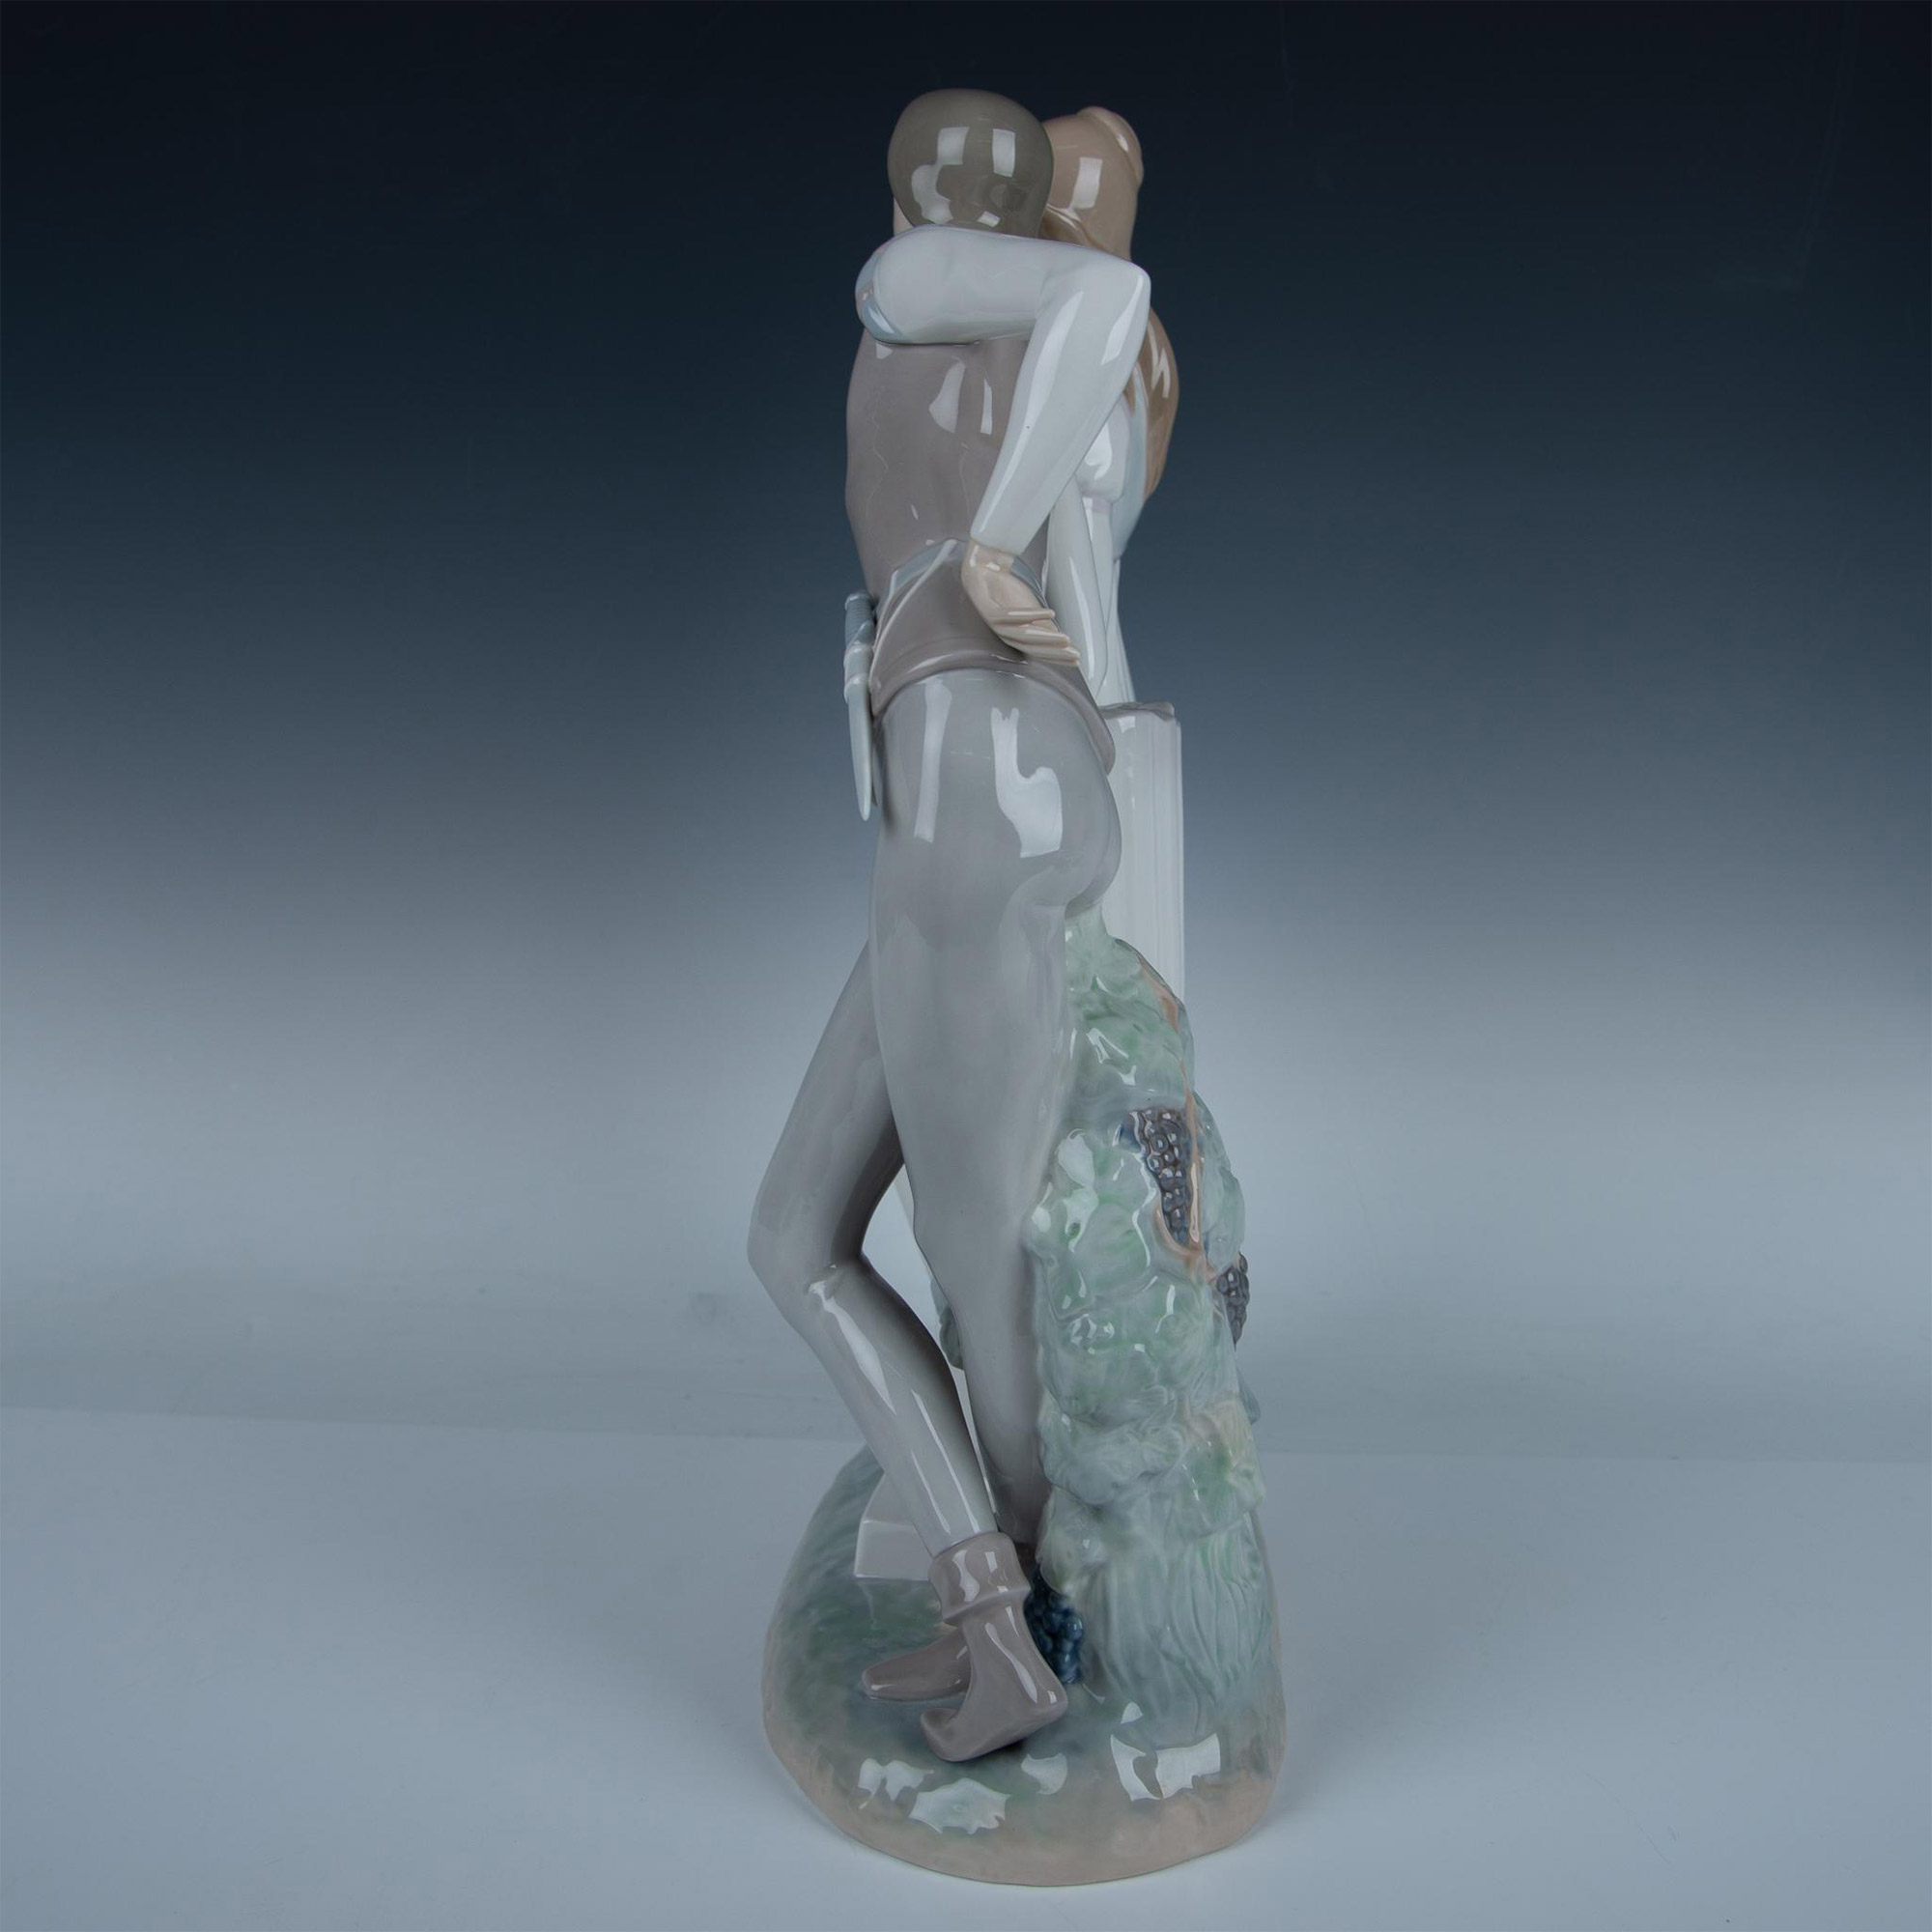 Romeo and Juliet 1004750 - Lladro Porcelain Figurine - Image 6 of 9